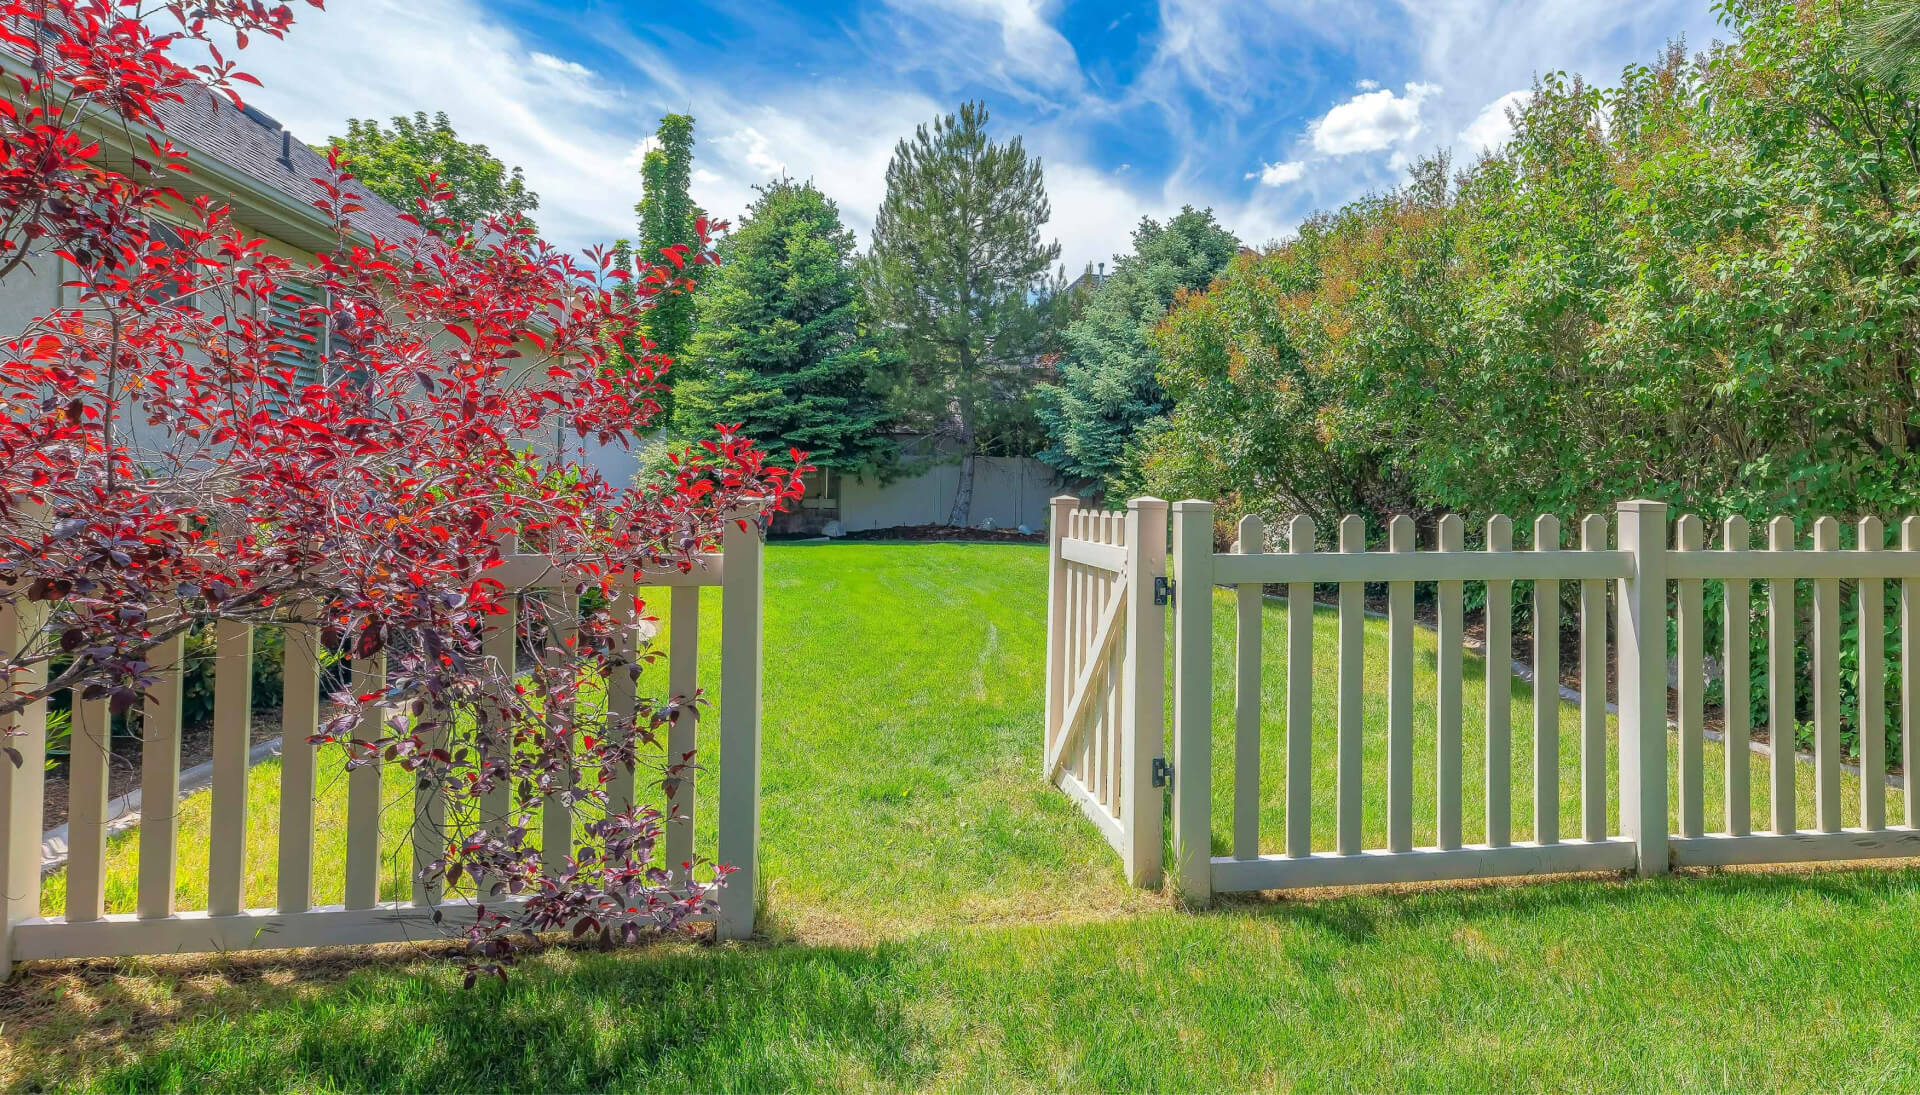 A functional fence gate providing access to a well-maintained backyard, surrounded by a wooden fence in Grand Rapids